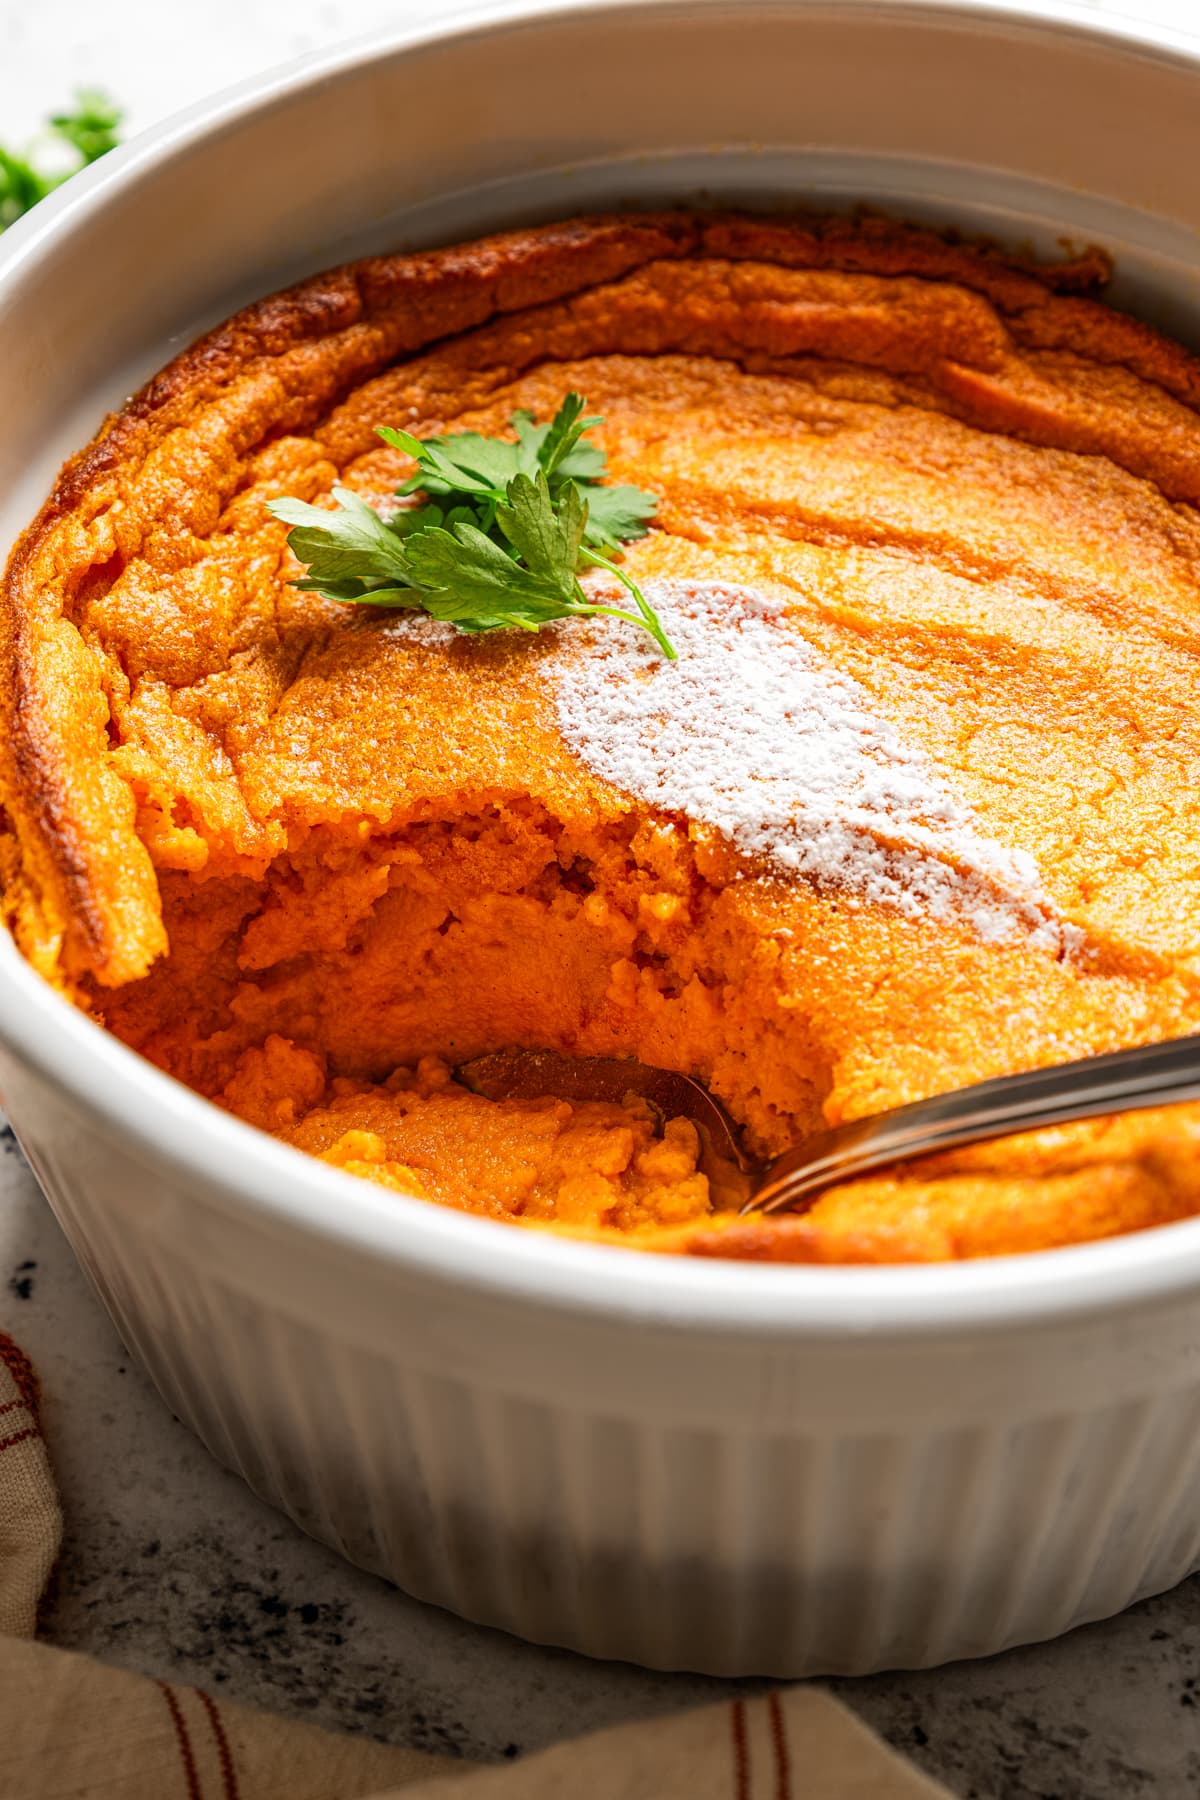 Carrot souffle in a baking dish with a spoon in it.